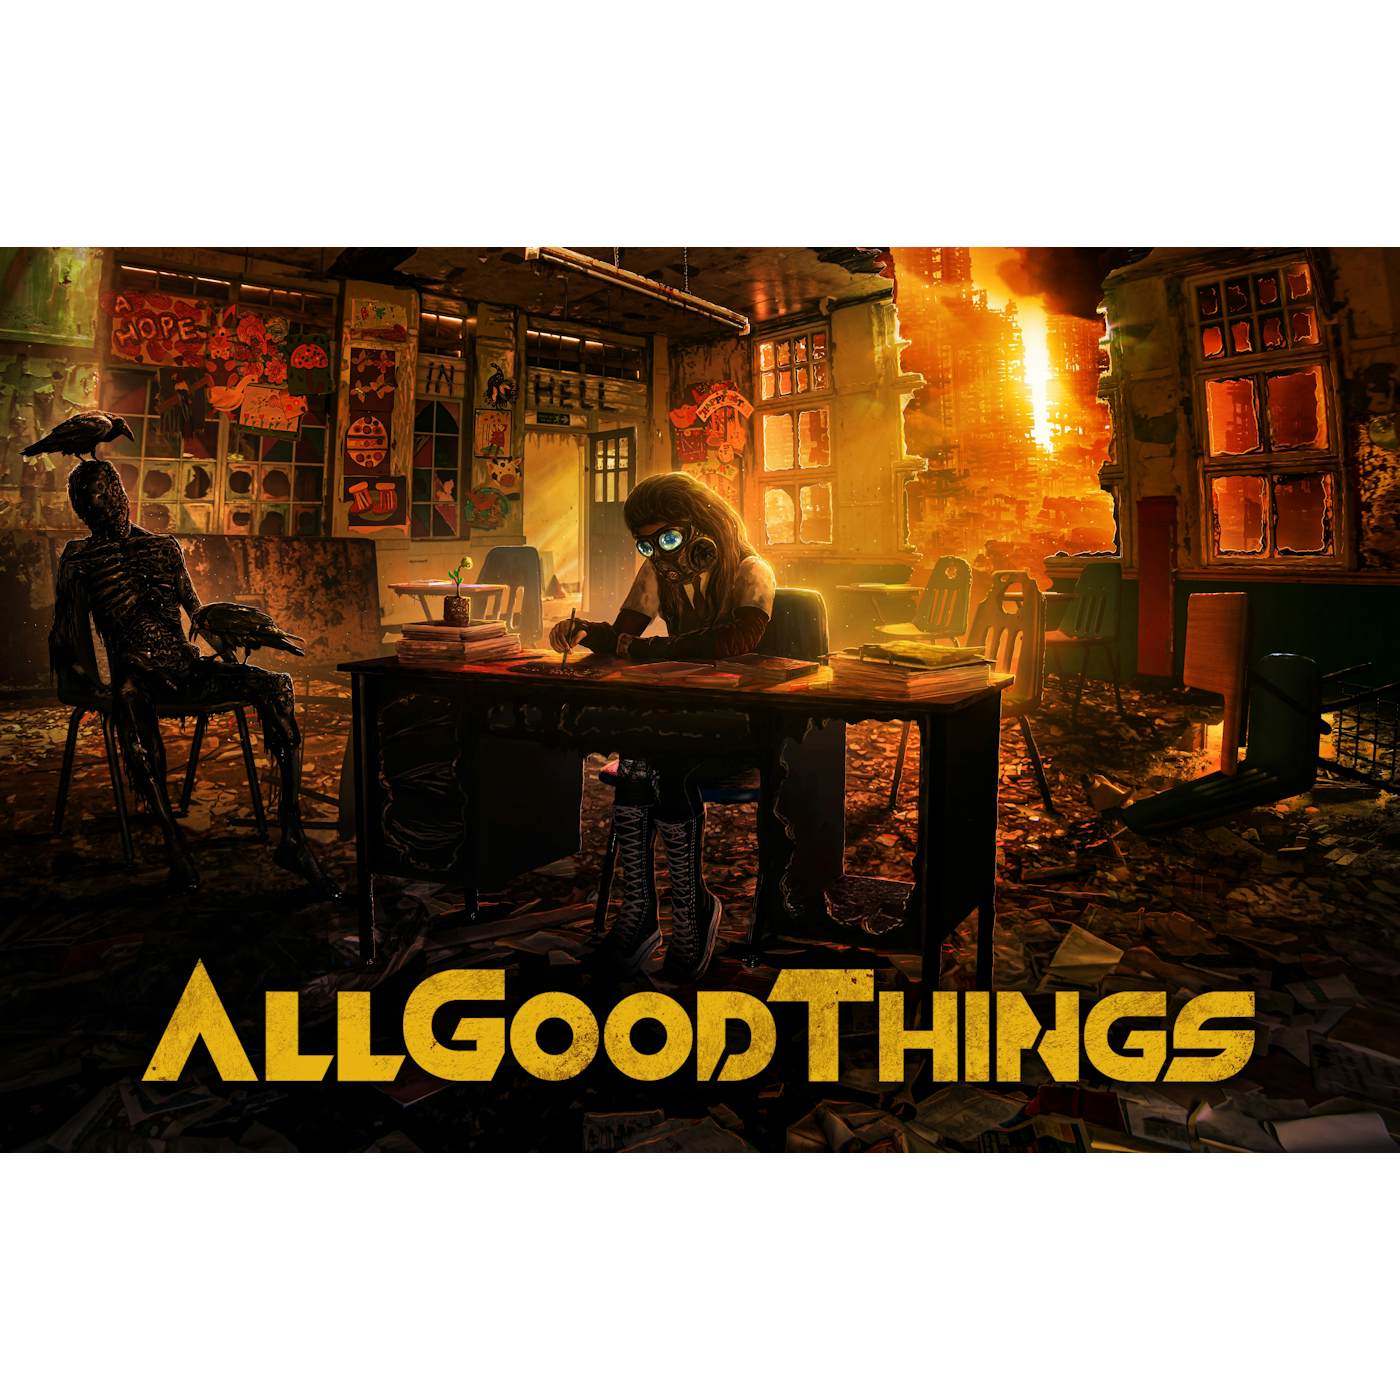 ALL GOOD THINGS - "A HOPE IN HELL" POSTER